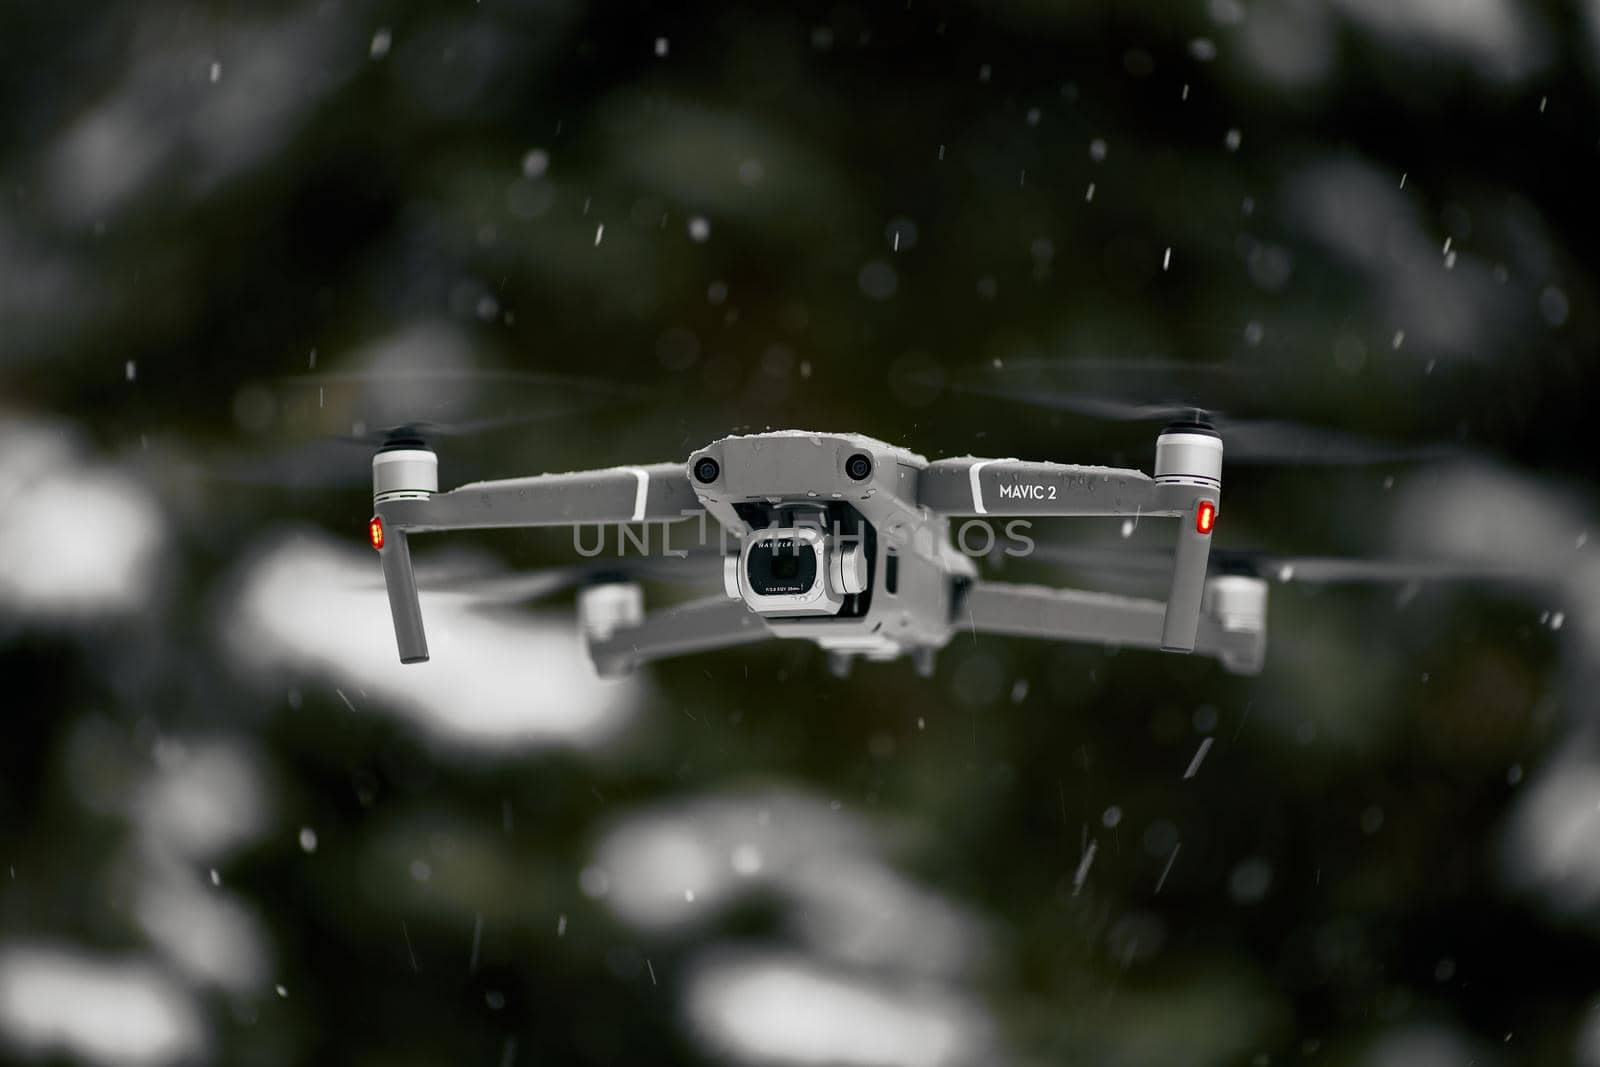 DJI Mavic 2 Pro, flying in wet snow conditions. DJI Mavic 2 Pro one of the most portable drones in the market, with Hasselblad camera. 07.12.2018 Rostov-on-Don, Russia by EvgeniyQW